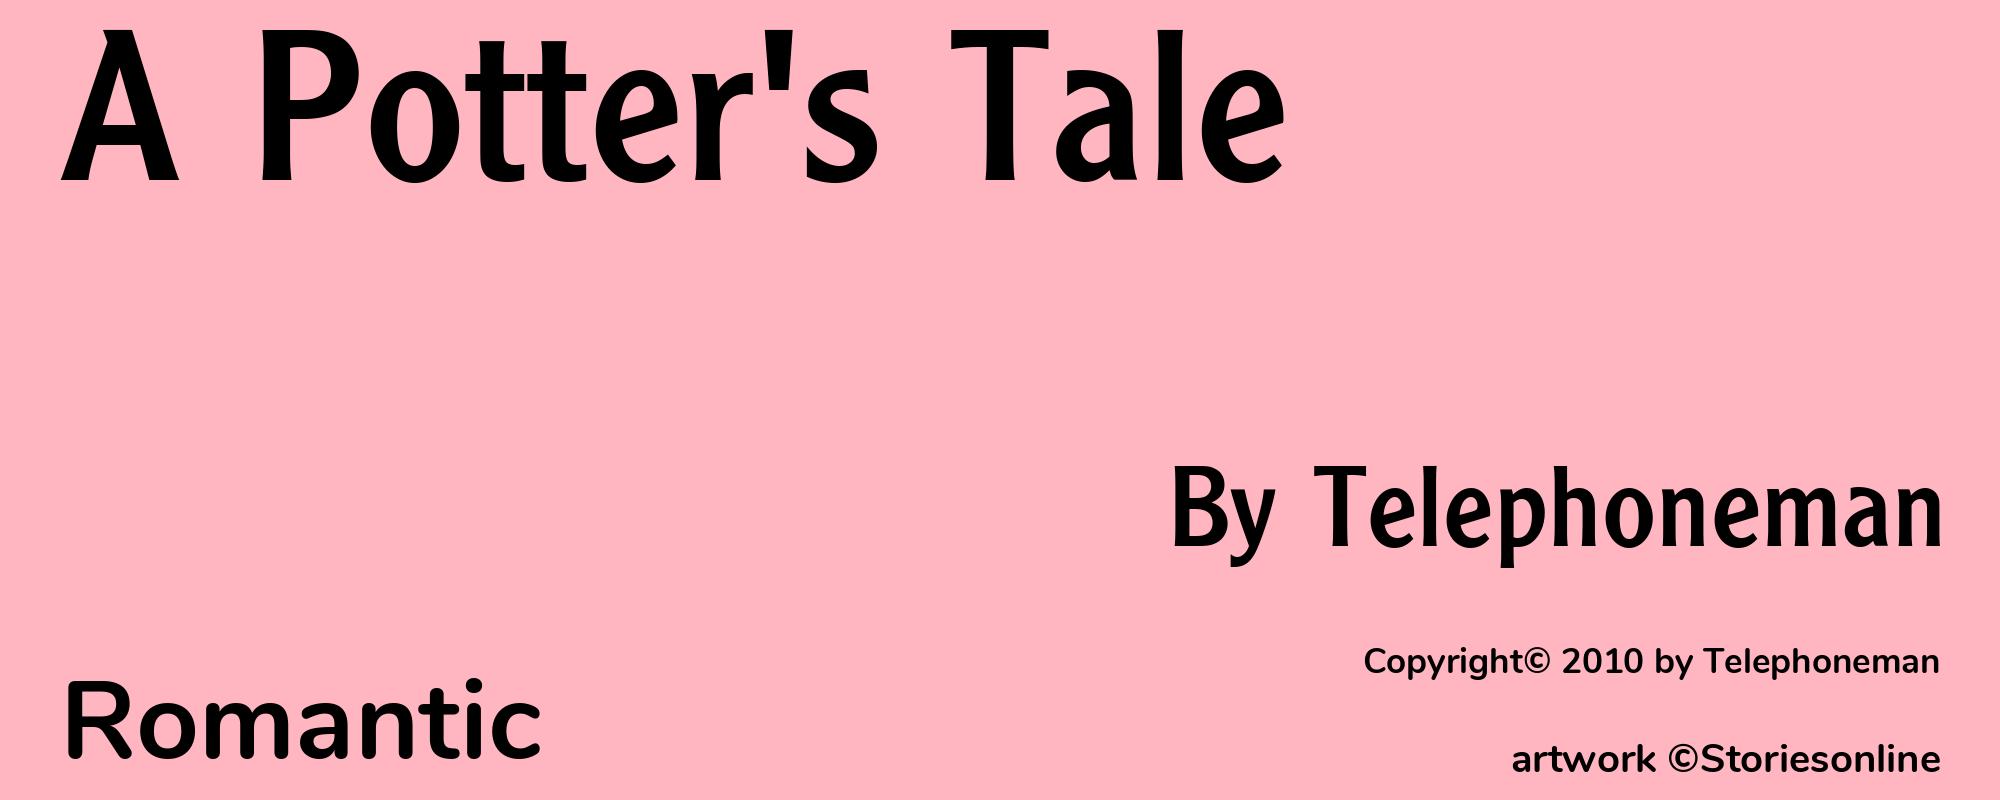 A Potter's Tale - Cover